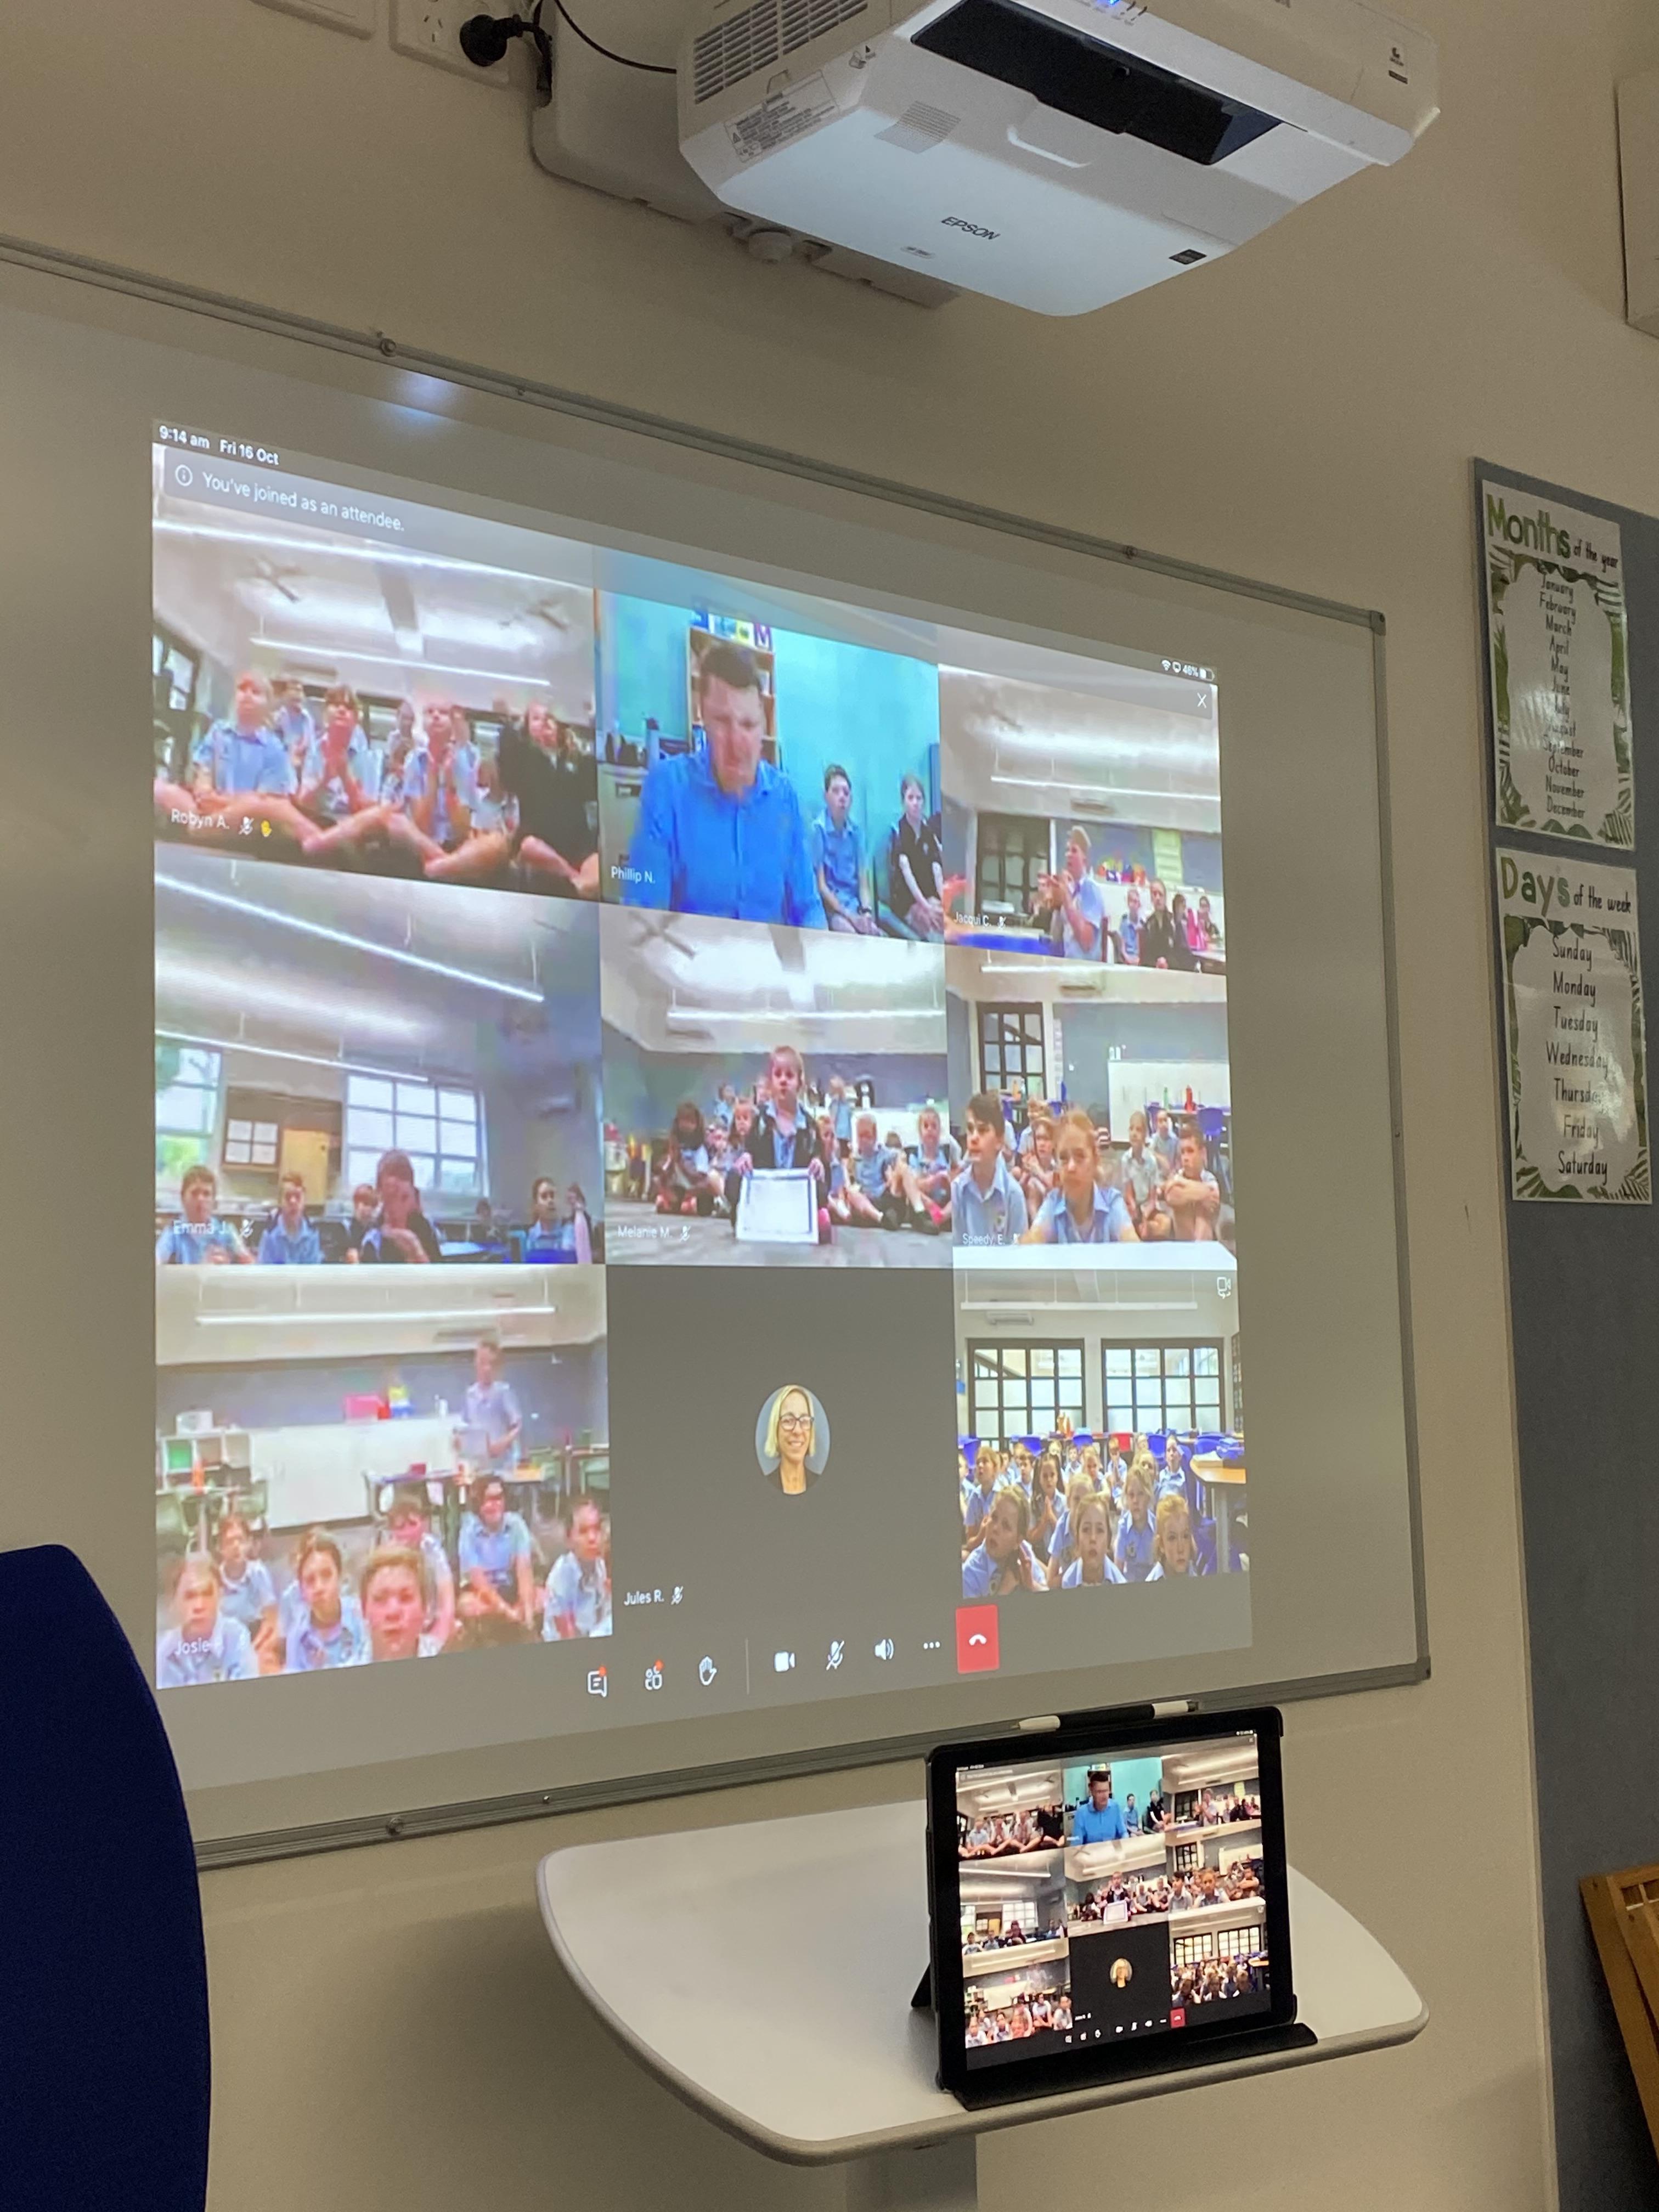 New technology in the classroom